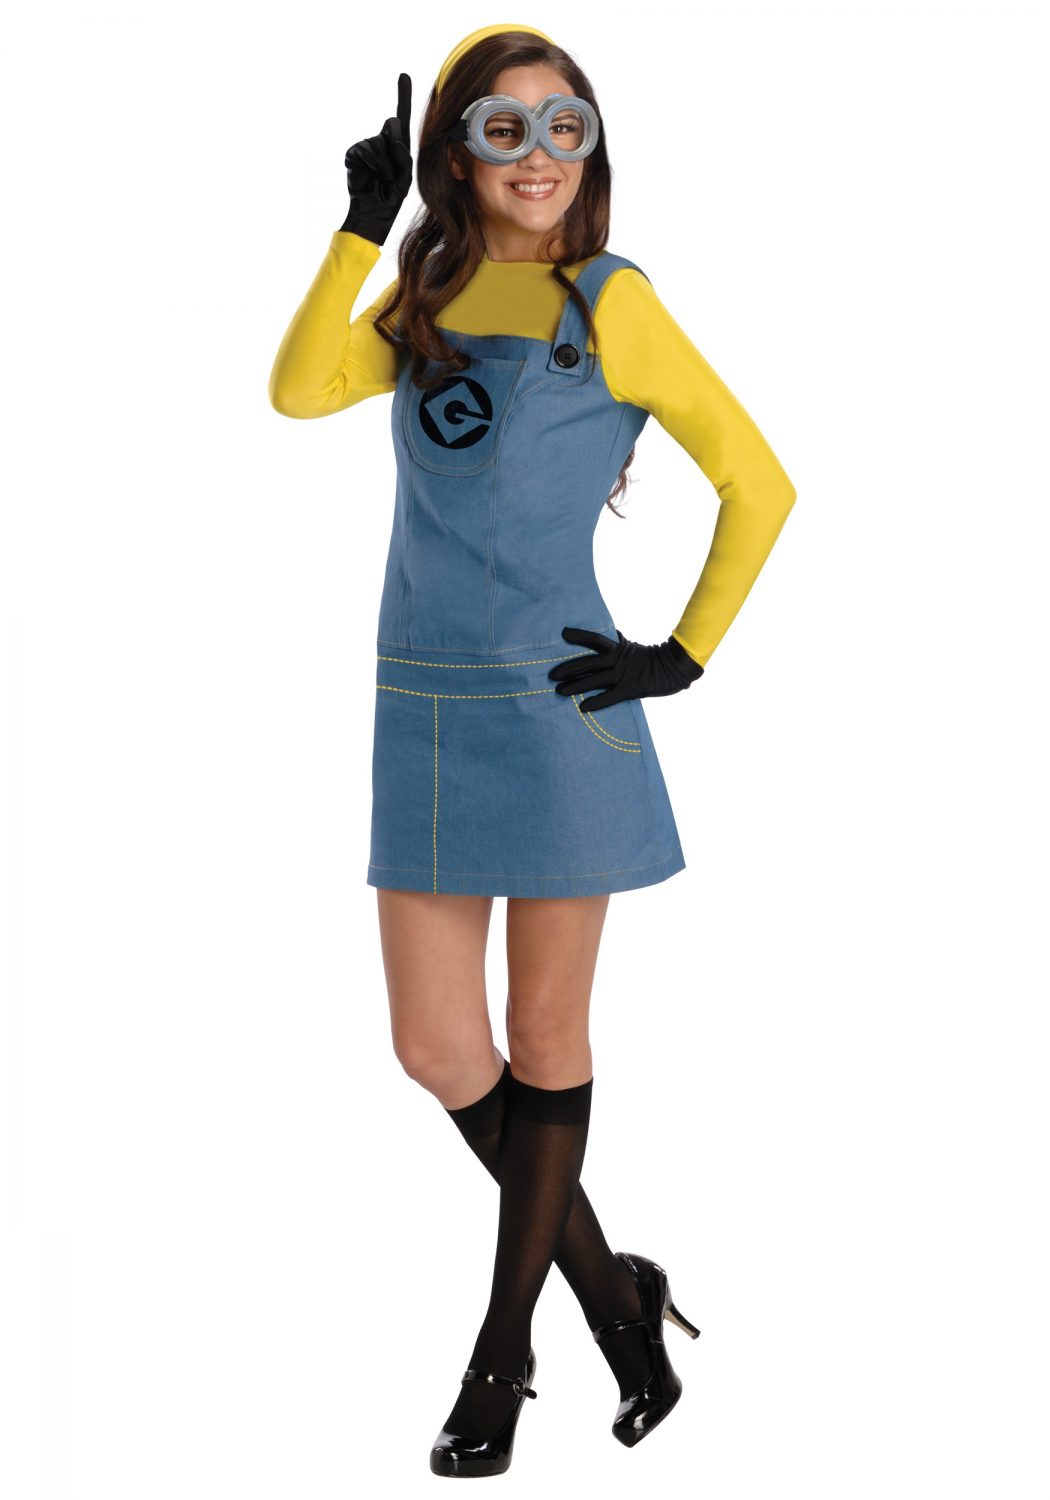 Minions2 Top 10 Teenagers Halloween Costumes Trends - 11